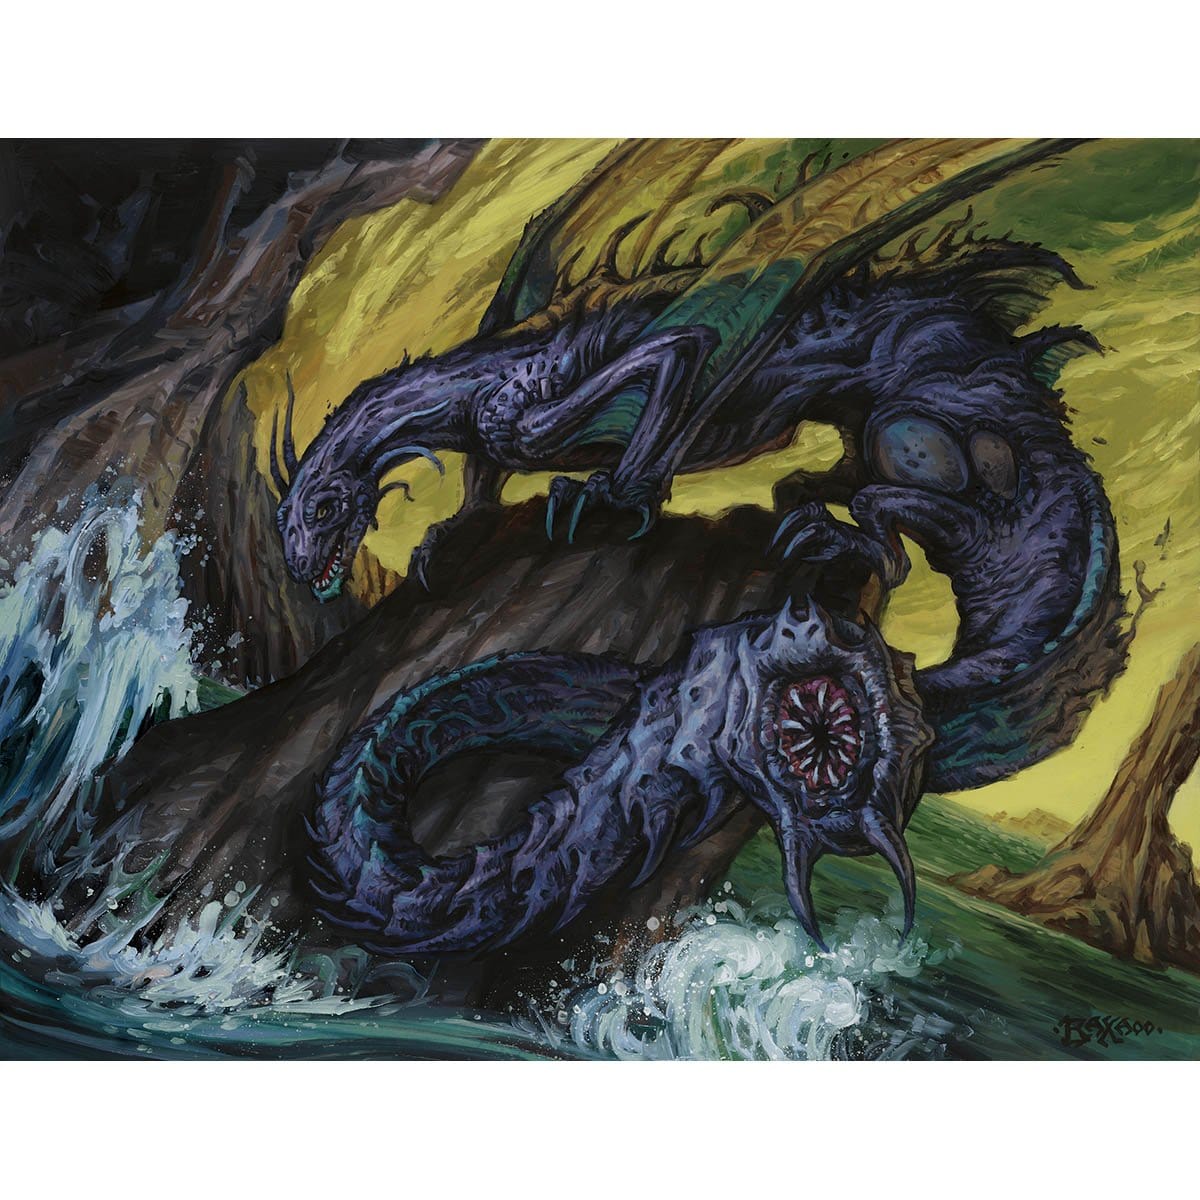 Wormfang Drake Print - Print - Original Magic Art - Accessories for Magic the Gathering and other card games